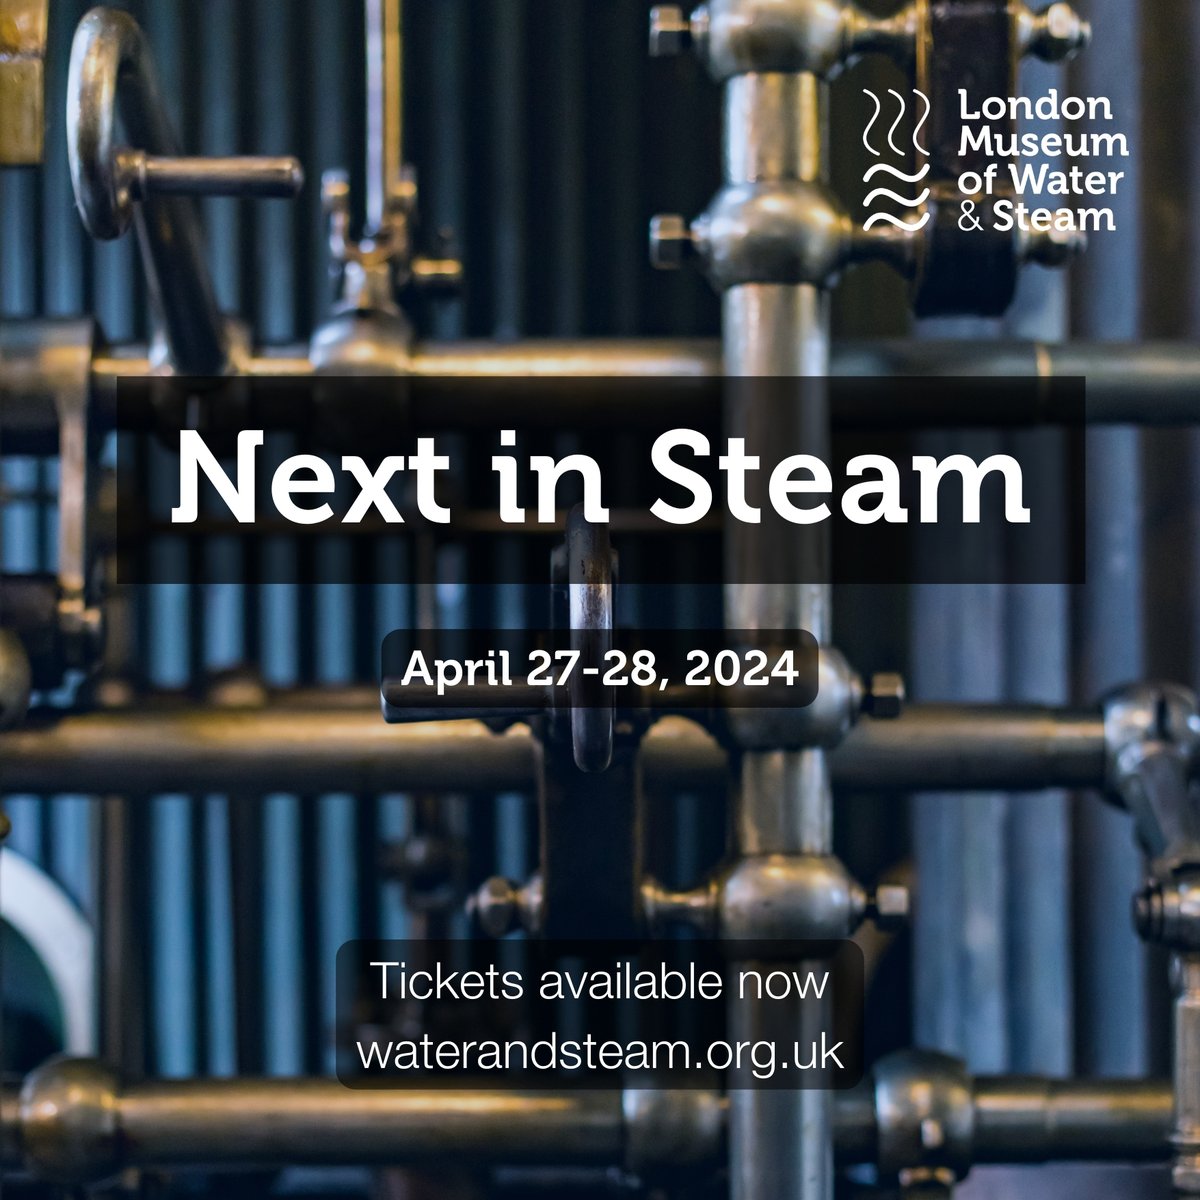 We are Next in Steam April 27 and 28! Share in the history and energy of the Kew Bridge Waterworks and marvel at the amazing working pumping engines that helped make London the city it is today. Tickets available now: rb.gy/dz54d8